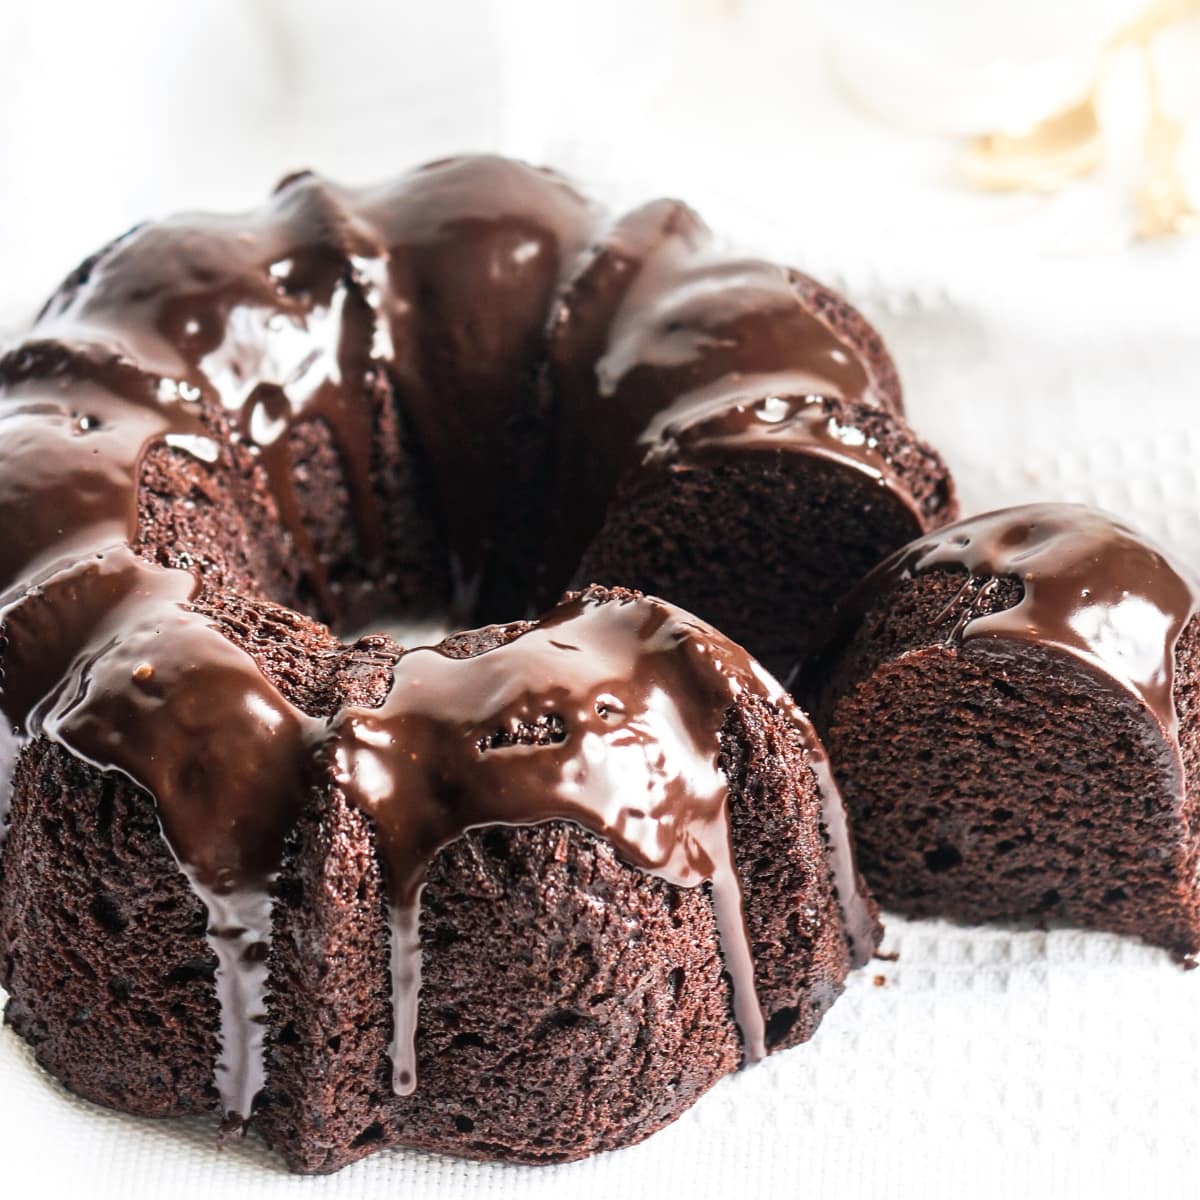 Chocolate Pound Cake with Chocolate Ganache and a Slice Removed